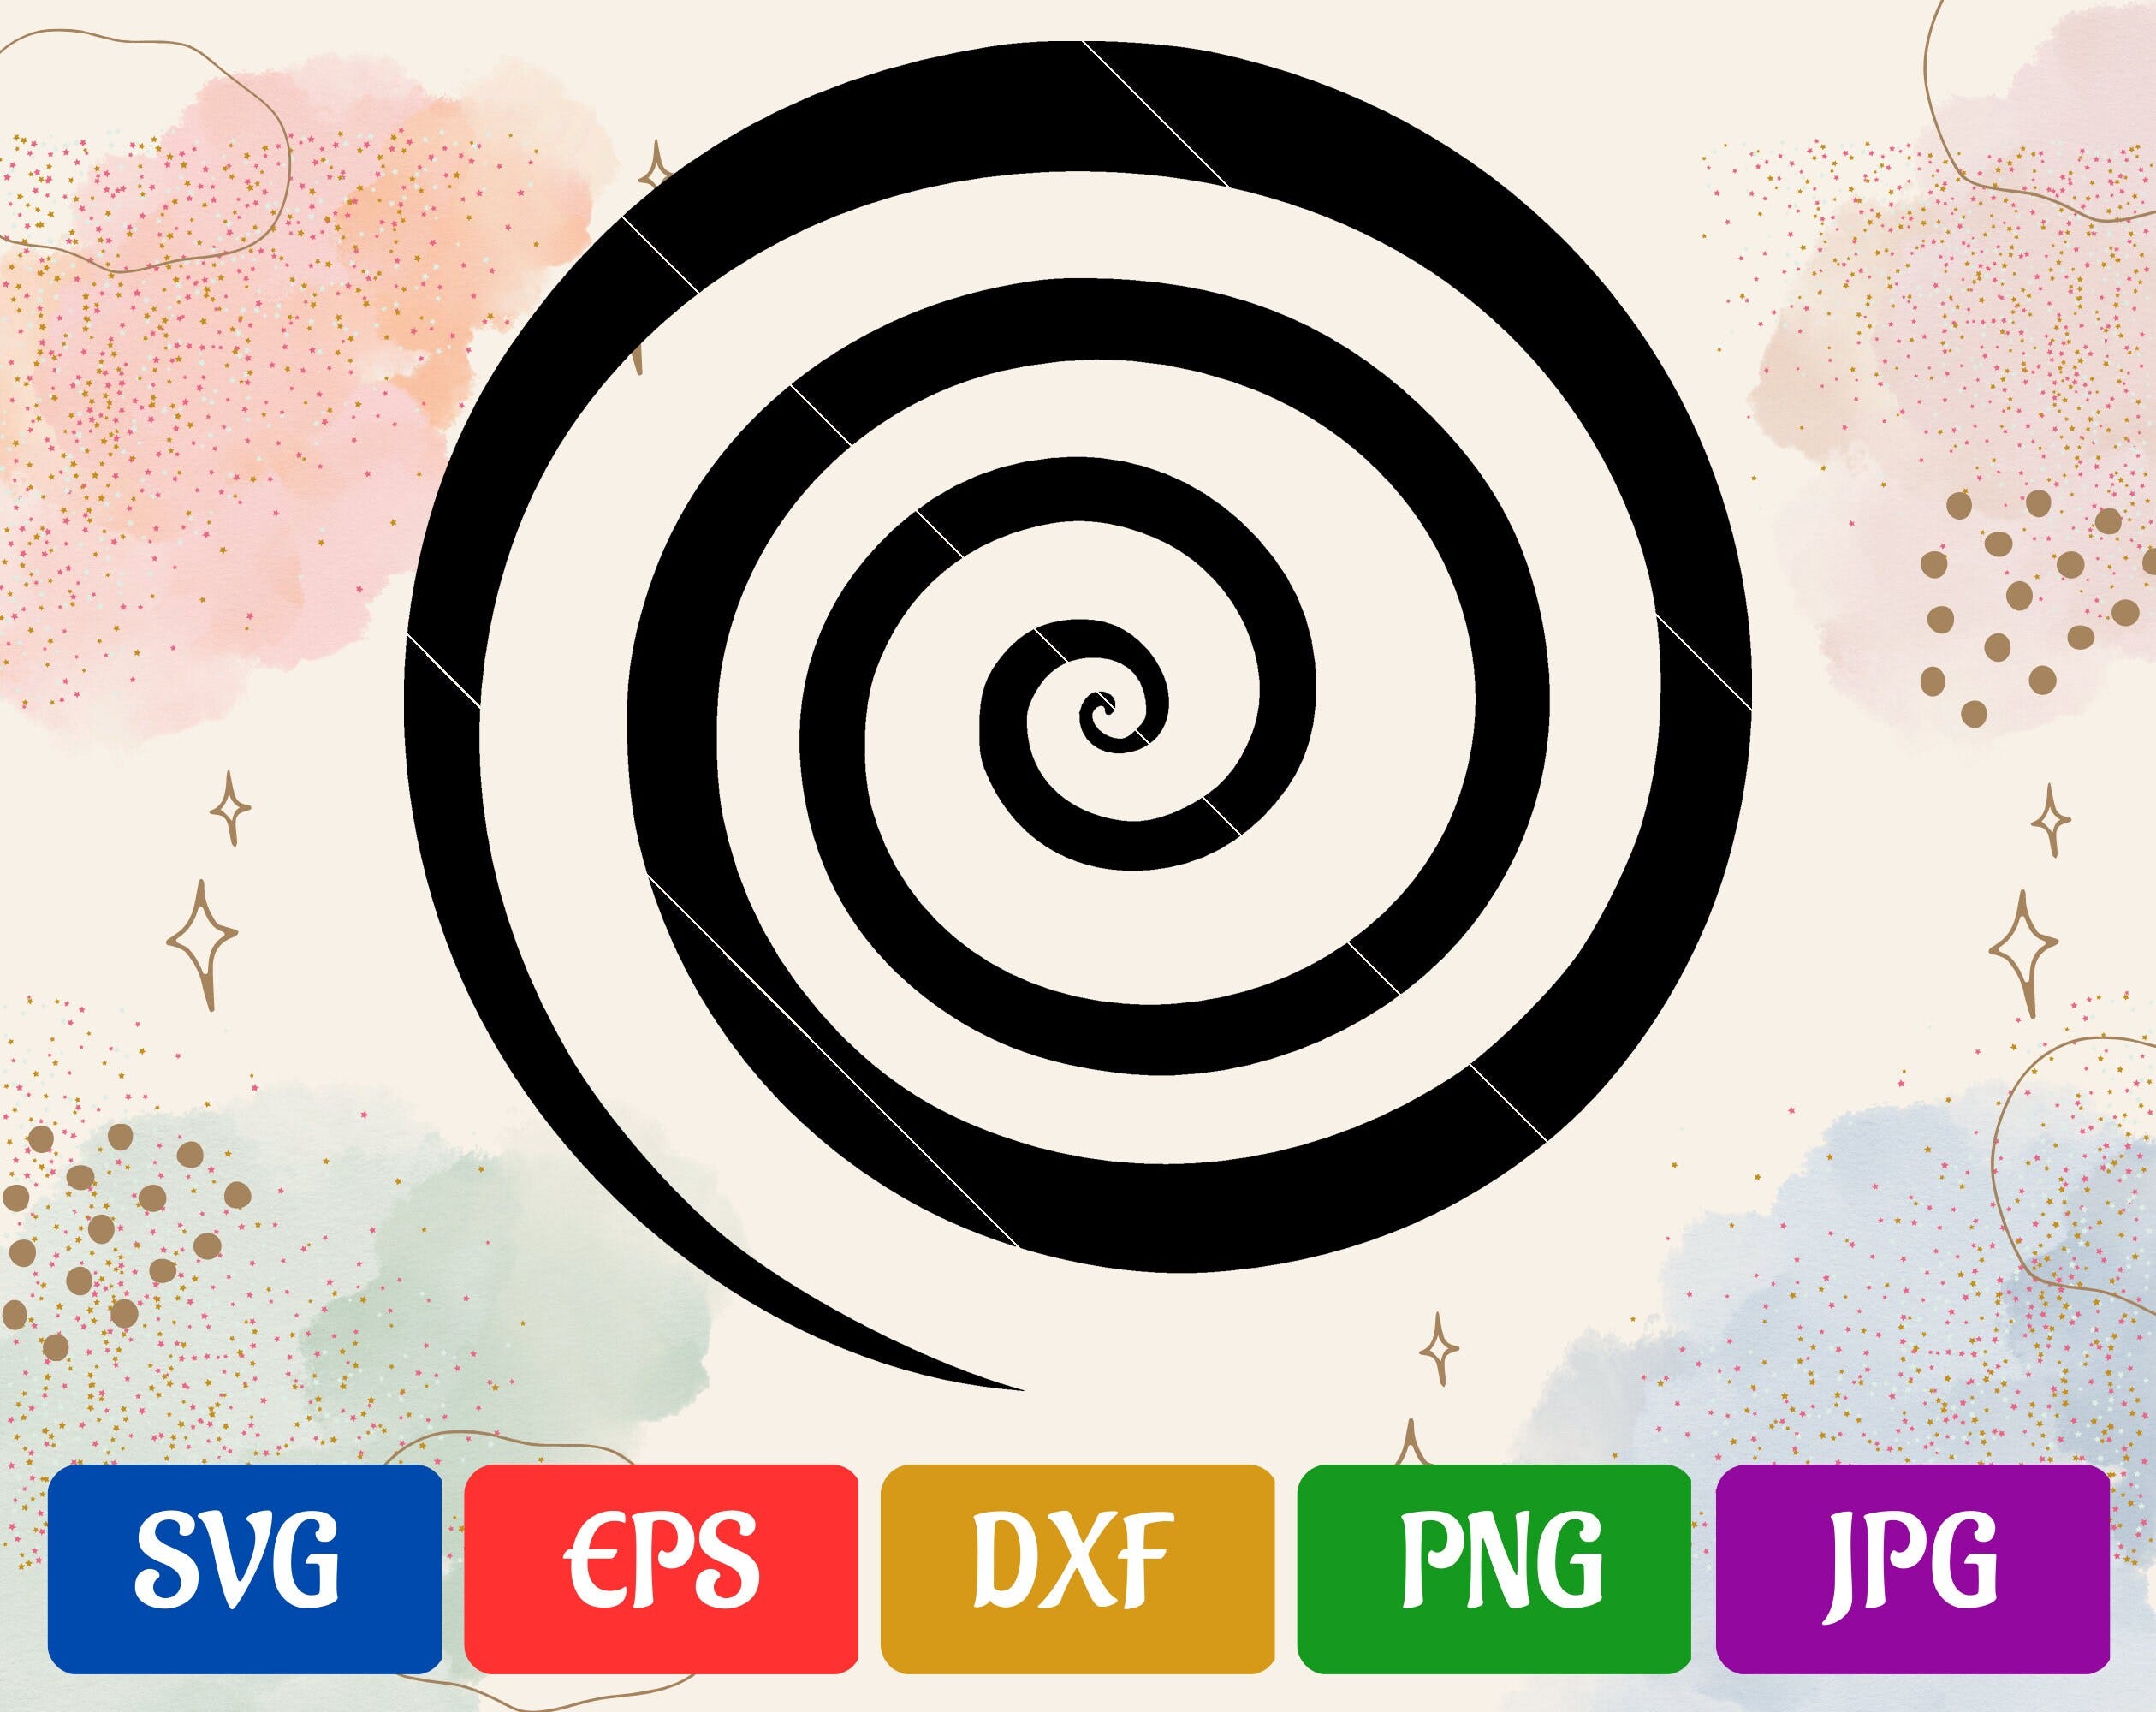 Spiral | High-Quality Vector | svg - eps - dxf - png - jpg | Cricut Explore | Silhouette Cameo